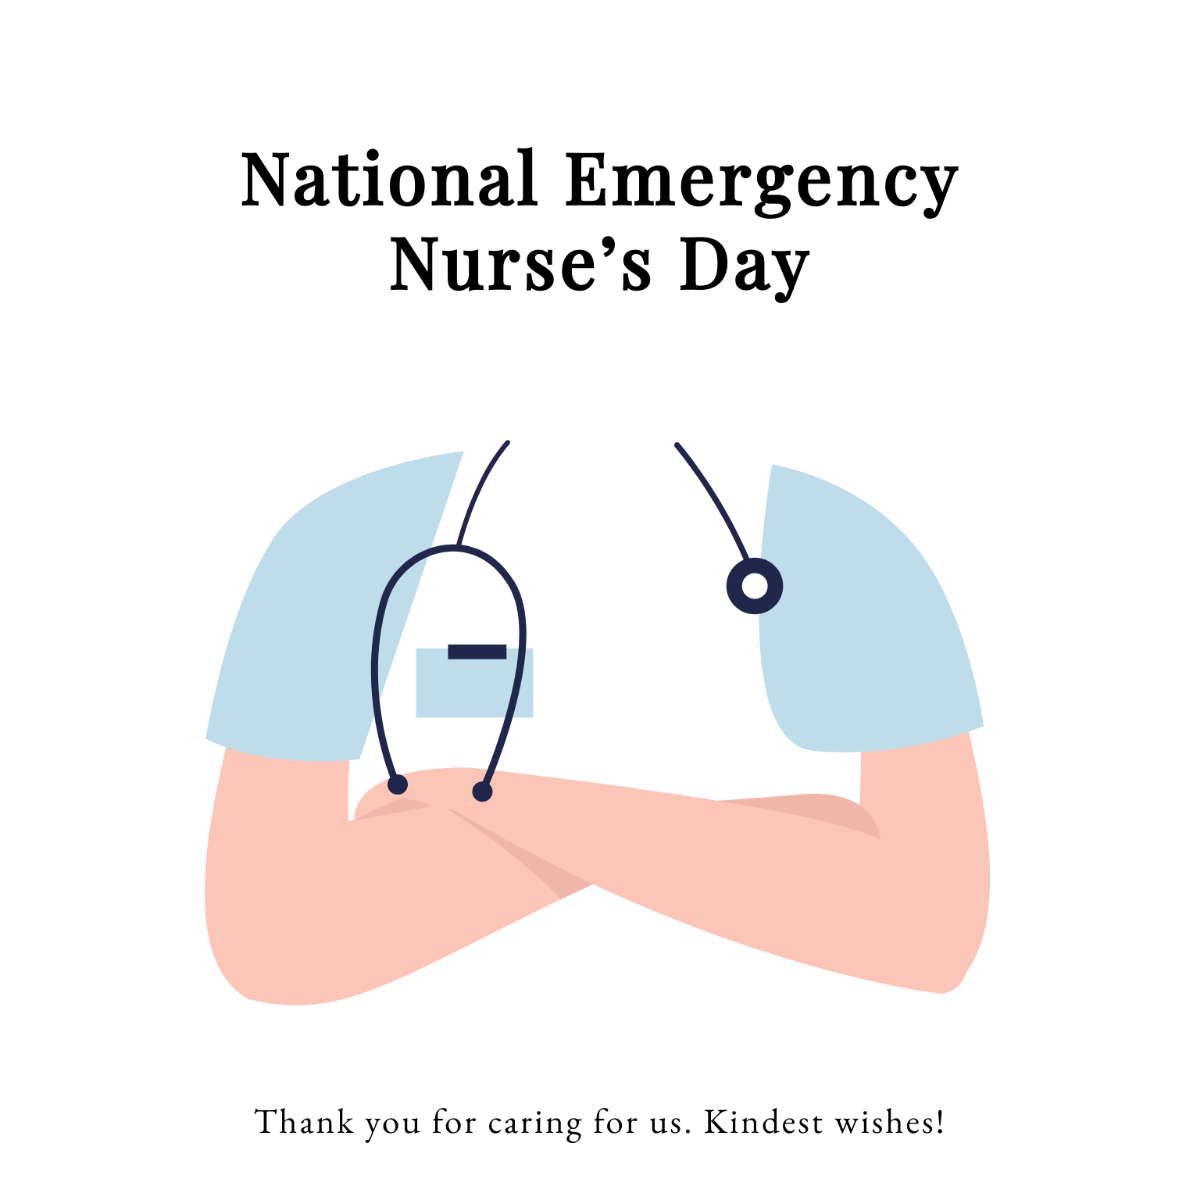 National Emergency Nurse’s Day Wishes Vector Template